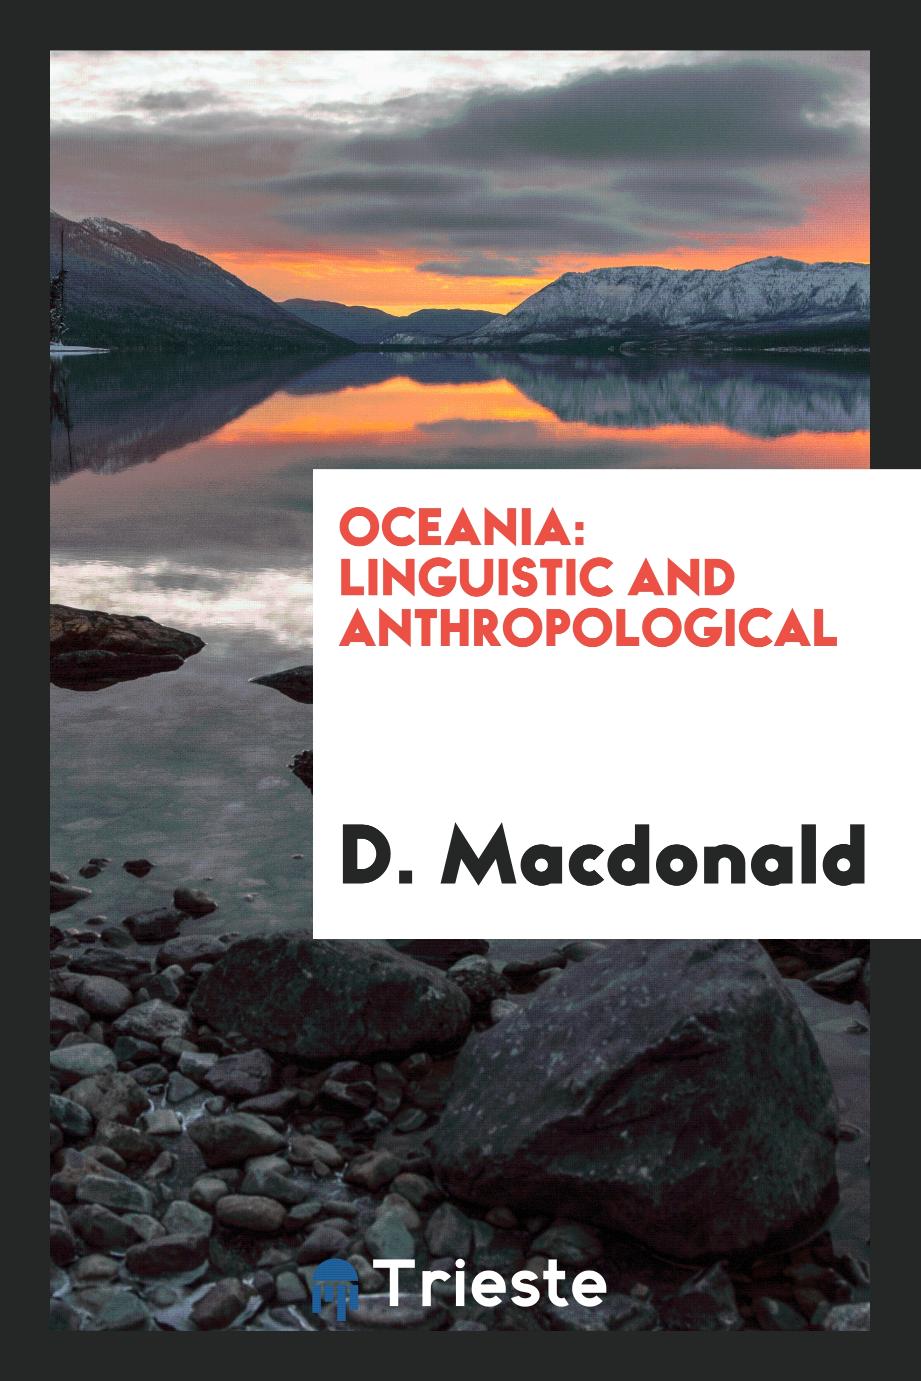 D. Macdonald - Oceania: Linguistic and Anthropological